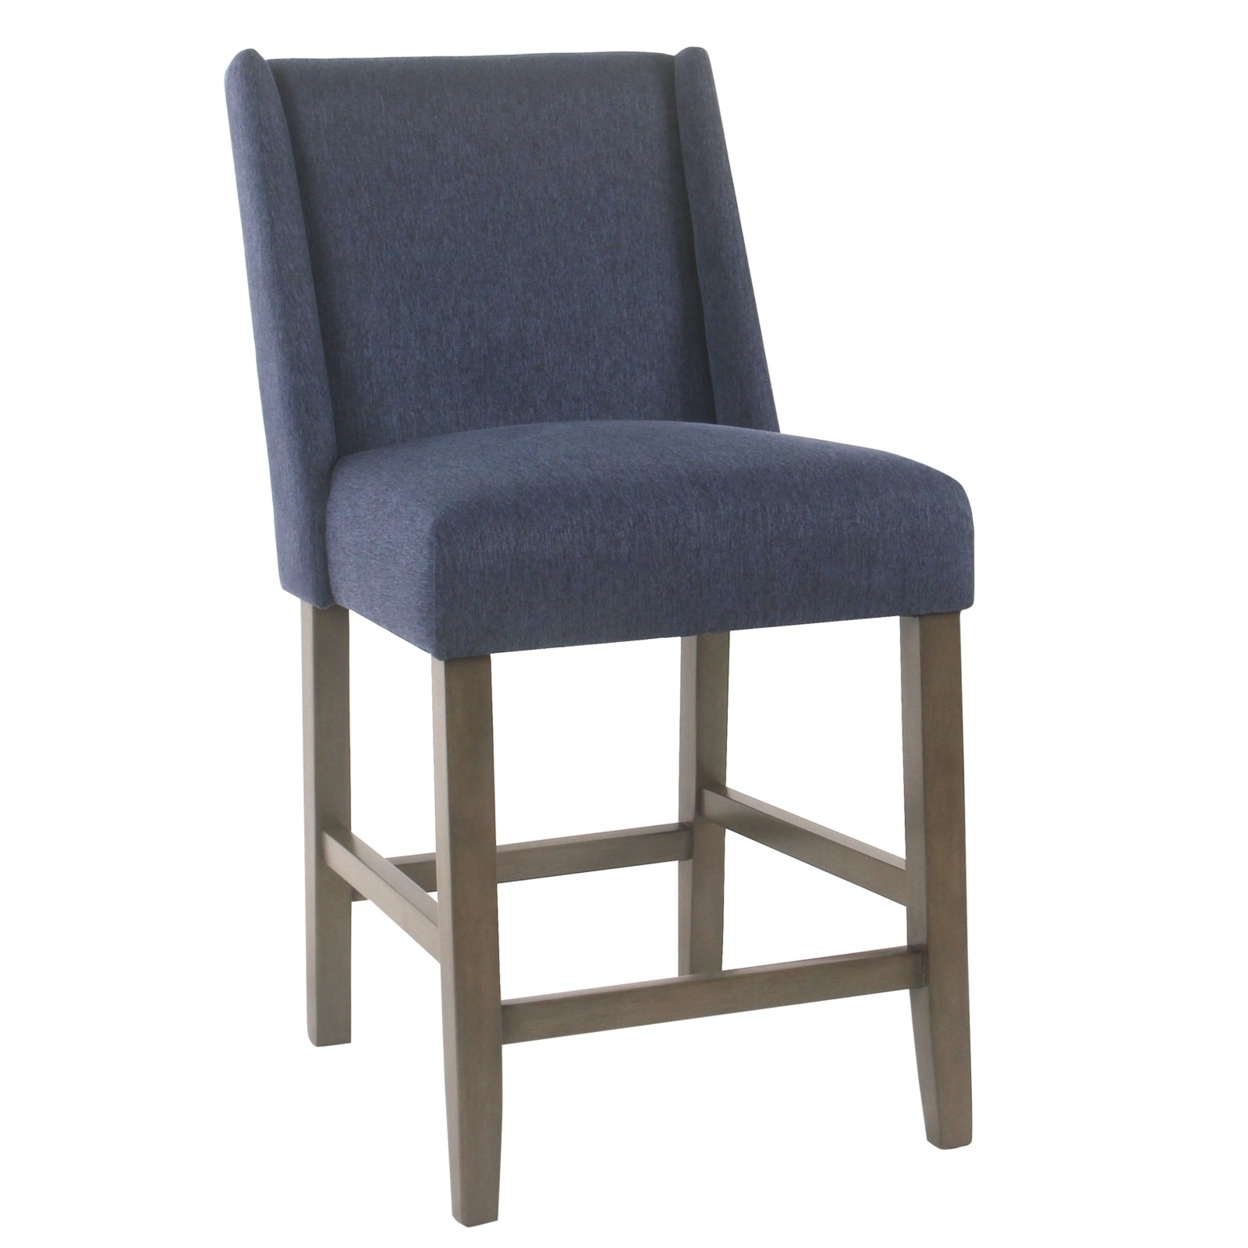 Fabric Upholstered Wooden Counter Stool With Curved Backrest And Cushion Seat, Navy Blue- Saltoro Sherpi